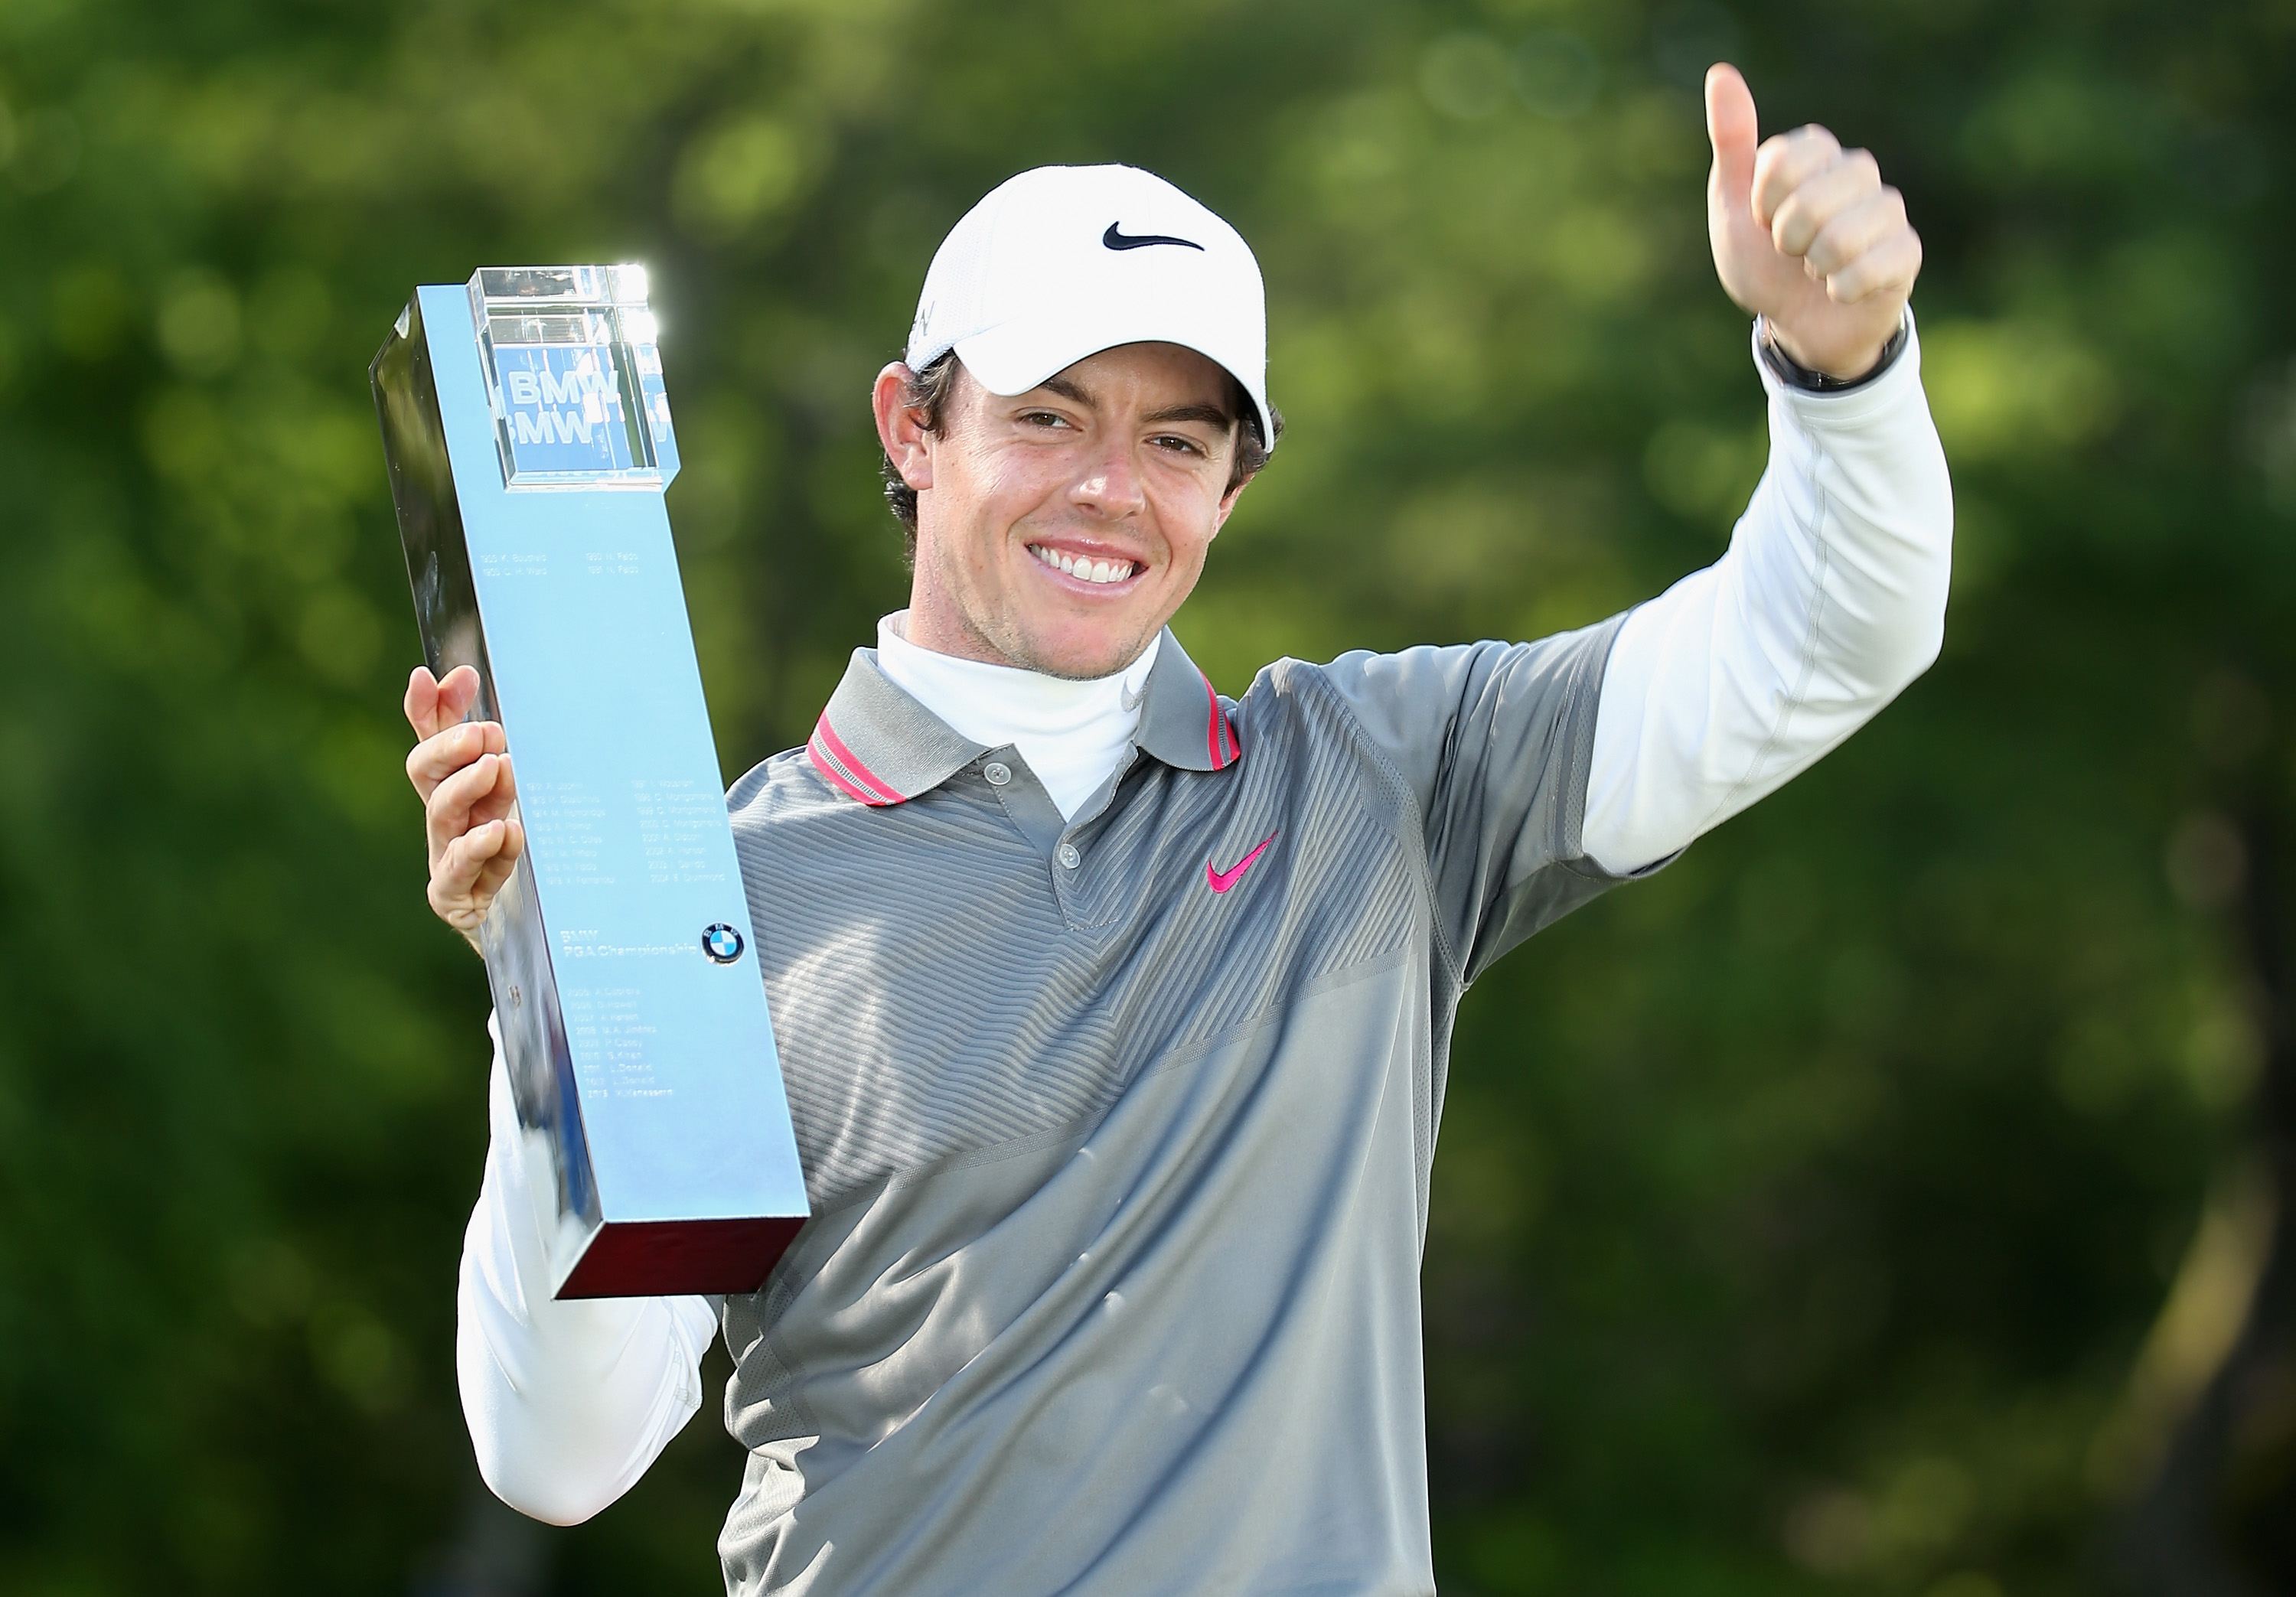 McIlroy announced he was splitting with his fiancee on the eve of the tournament (Photo: Getty Images)